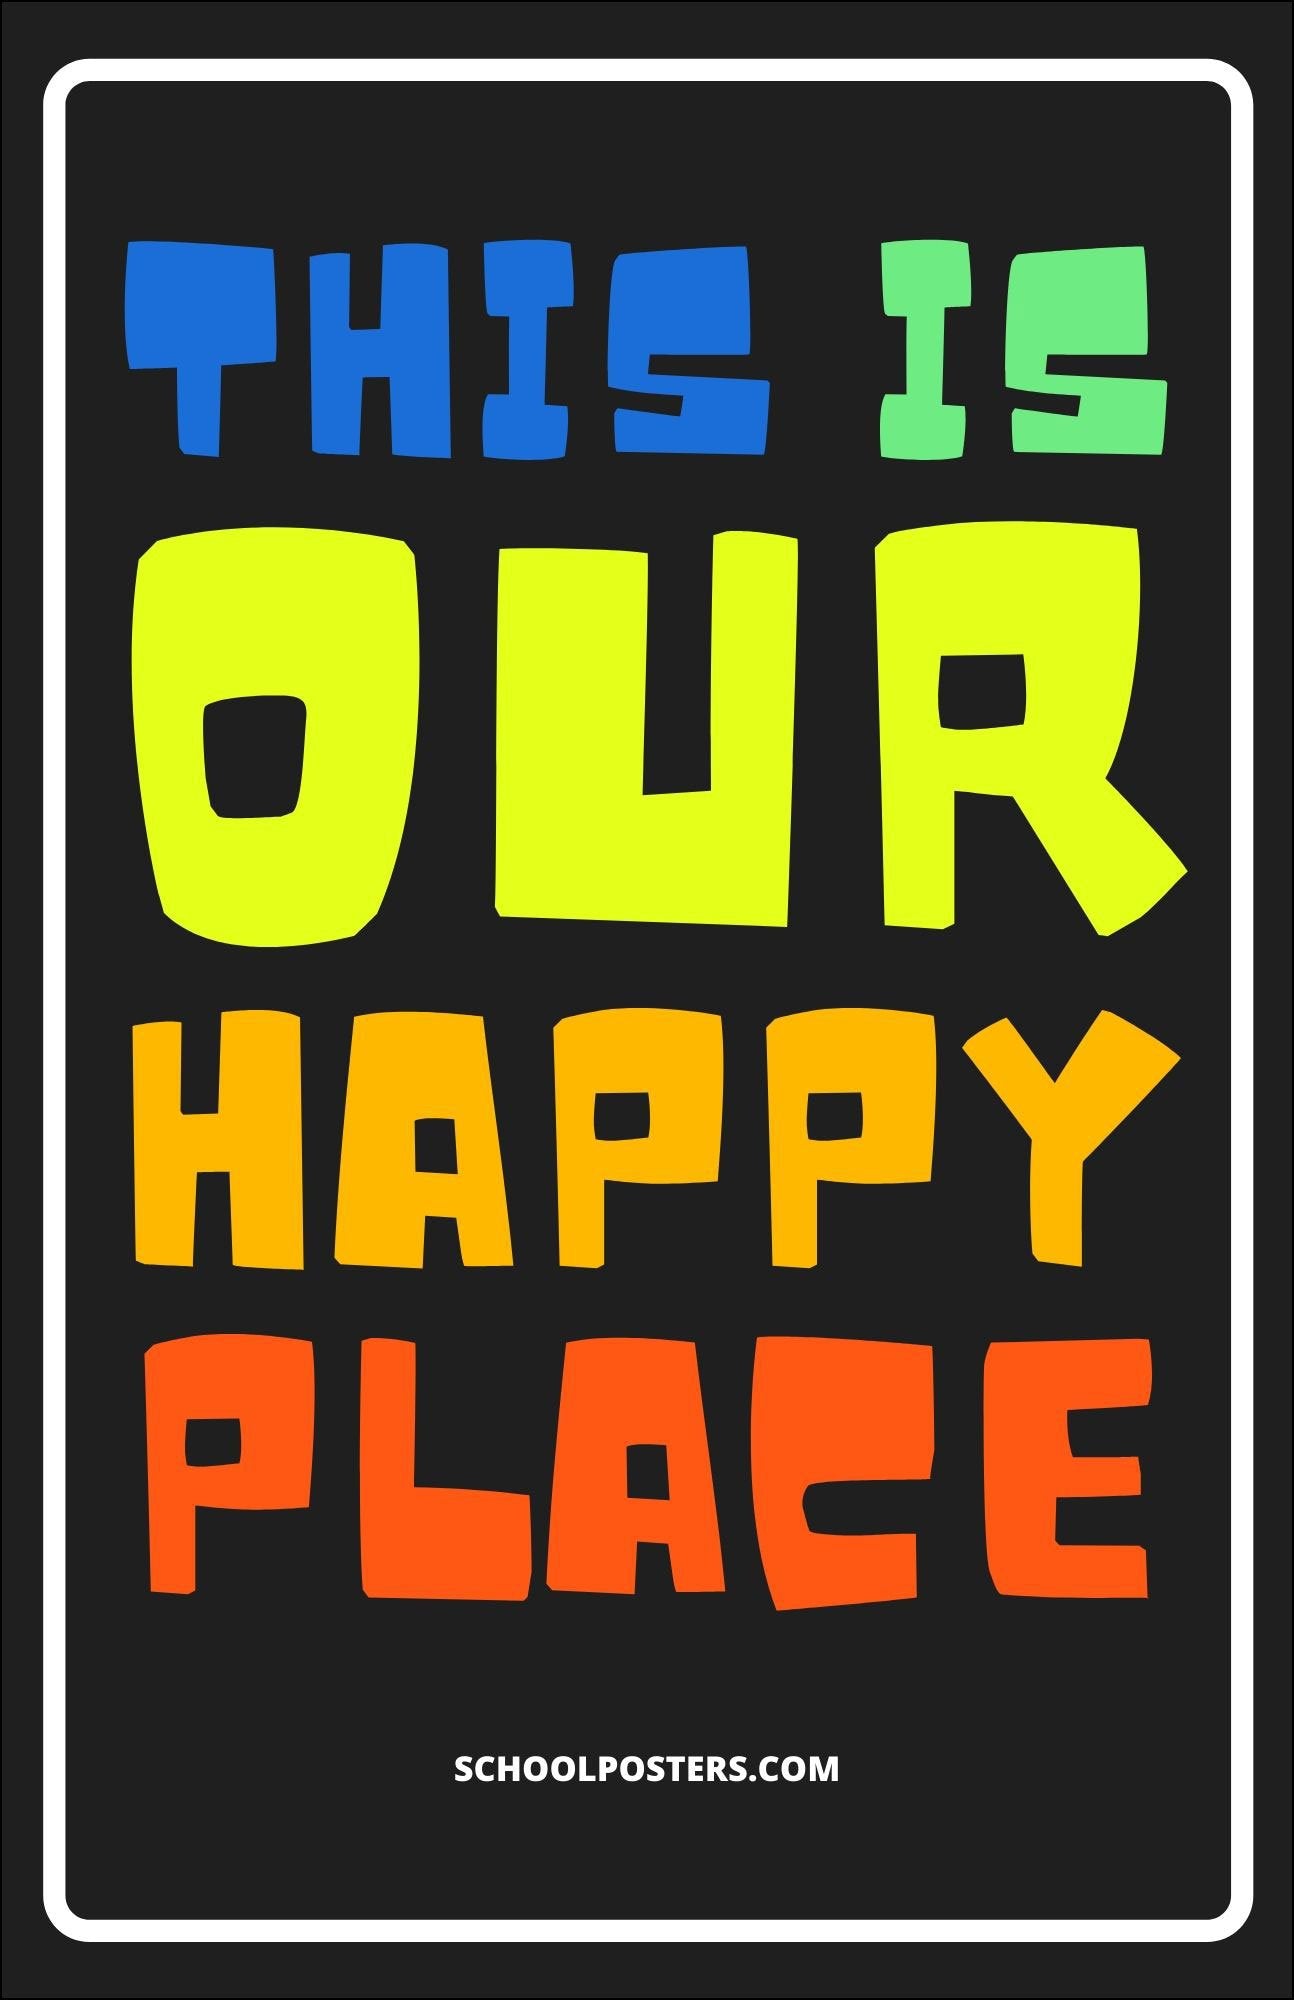 Happy Place Poster